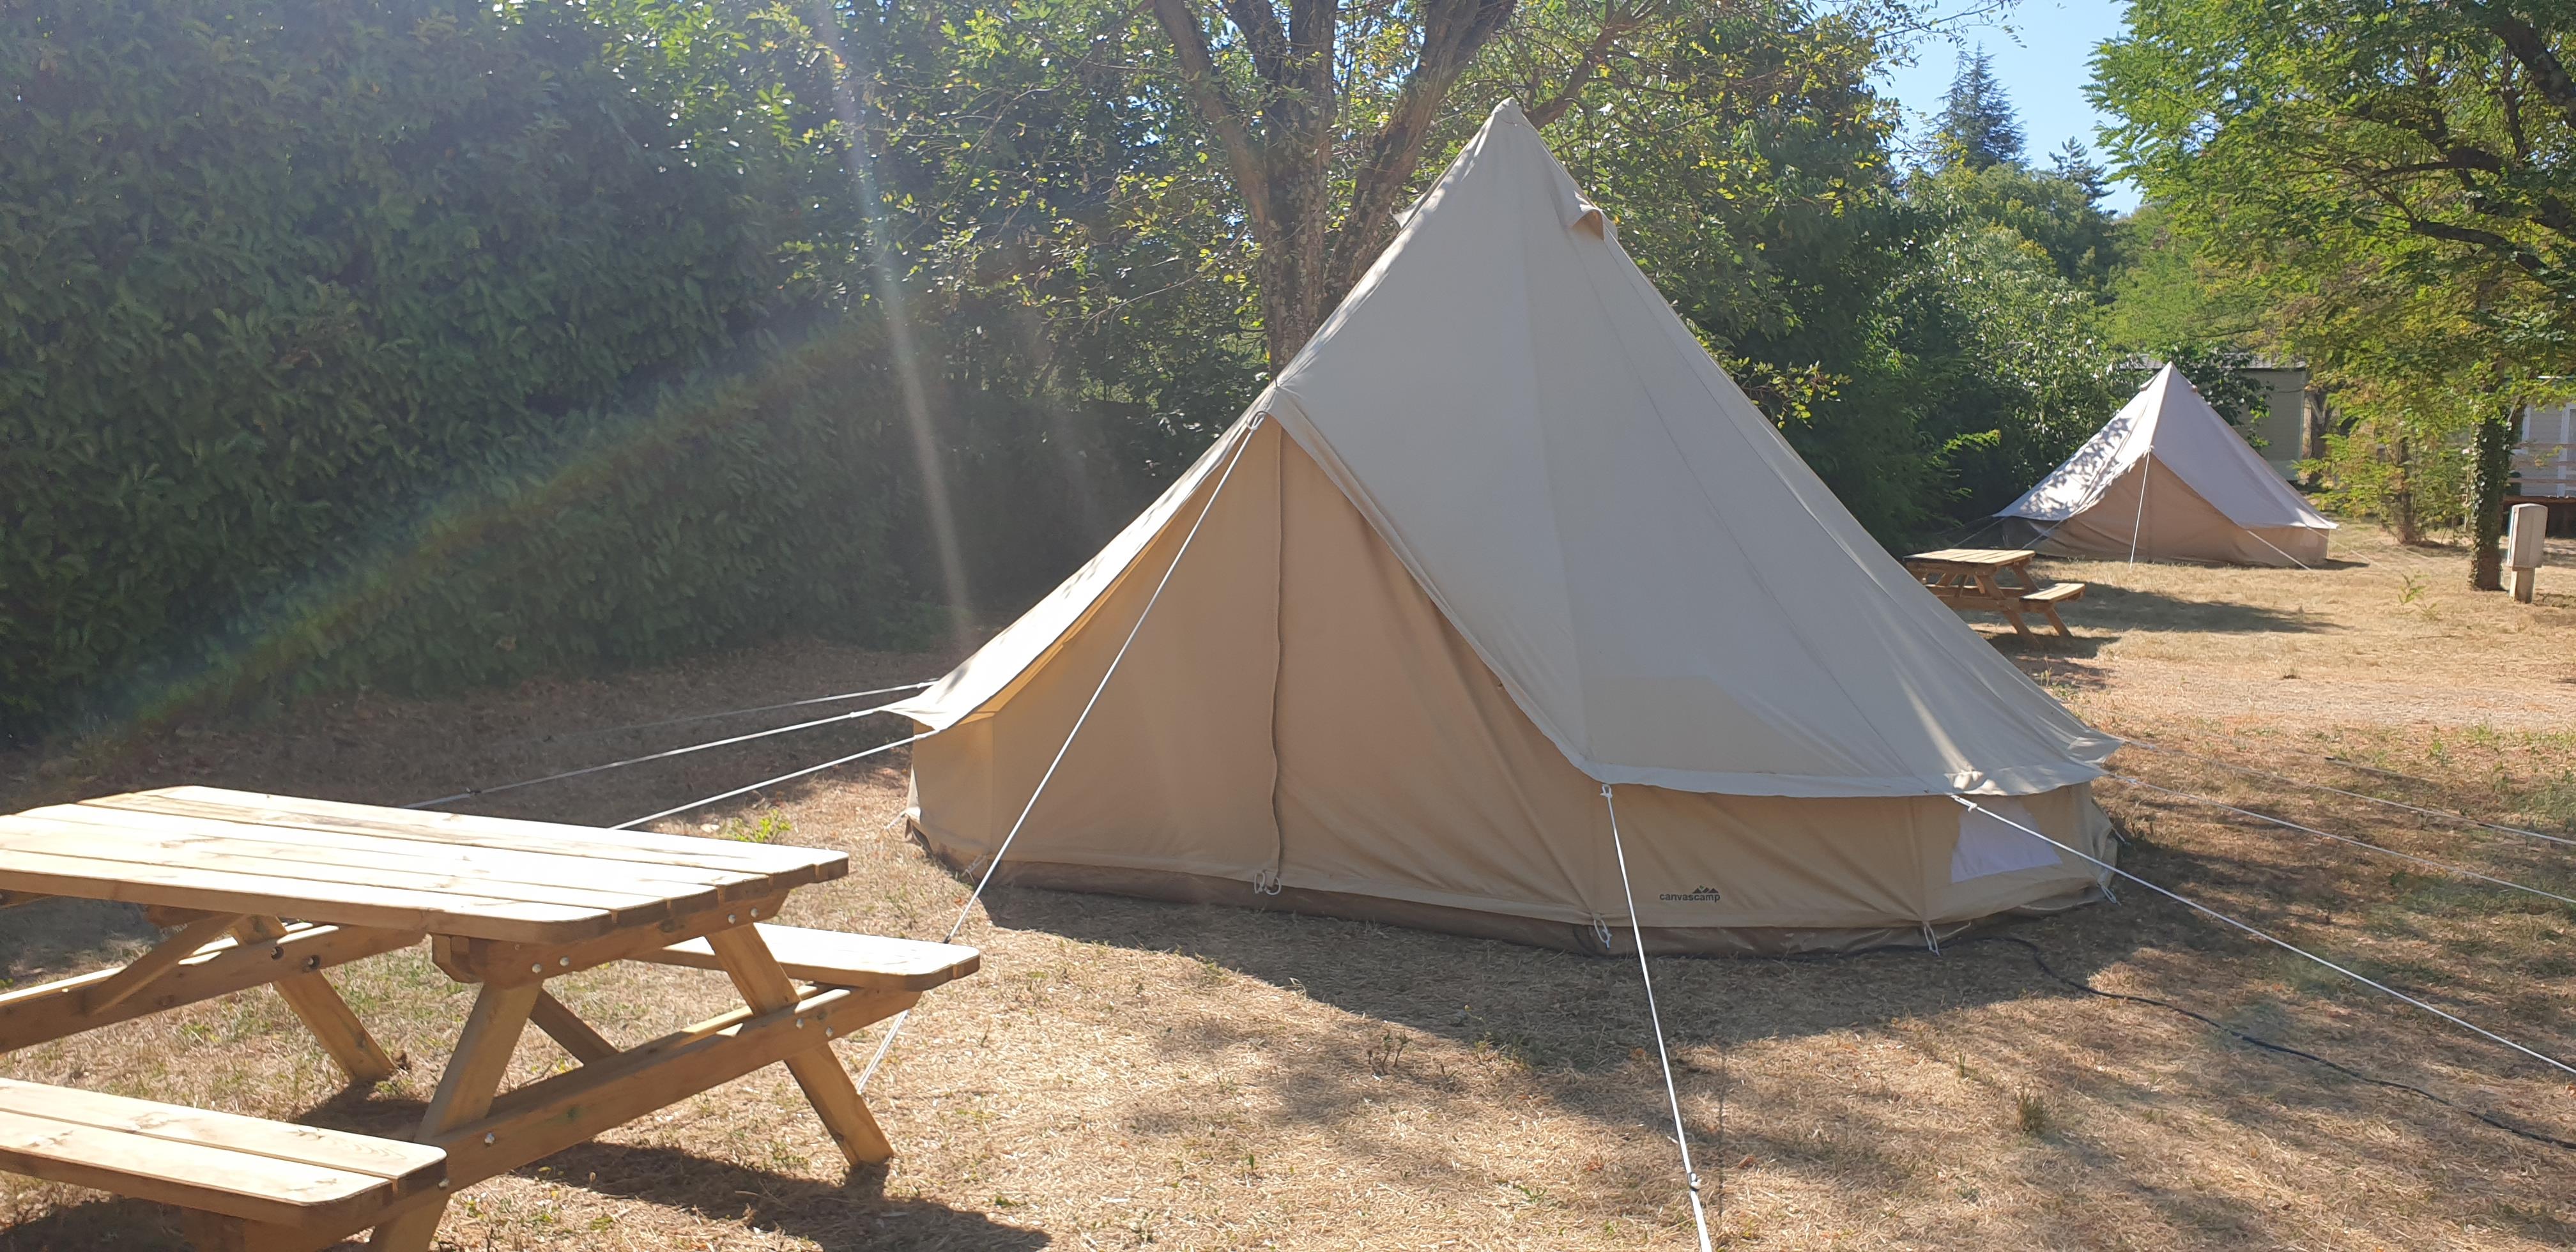 Accommodation - Fitted Tent 2/4 Pers - Camping La Résidence d'Eté